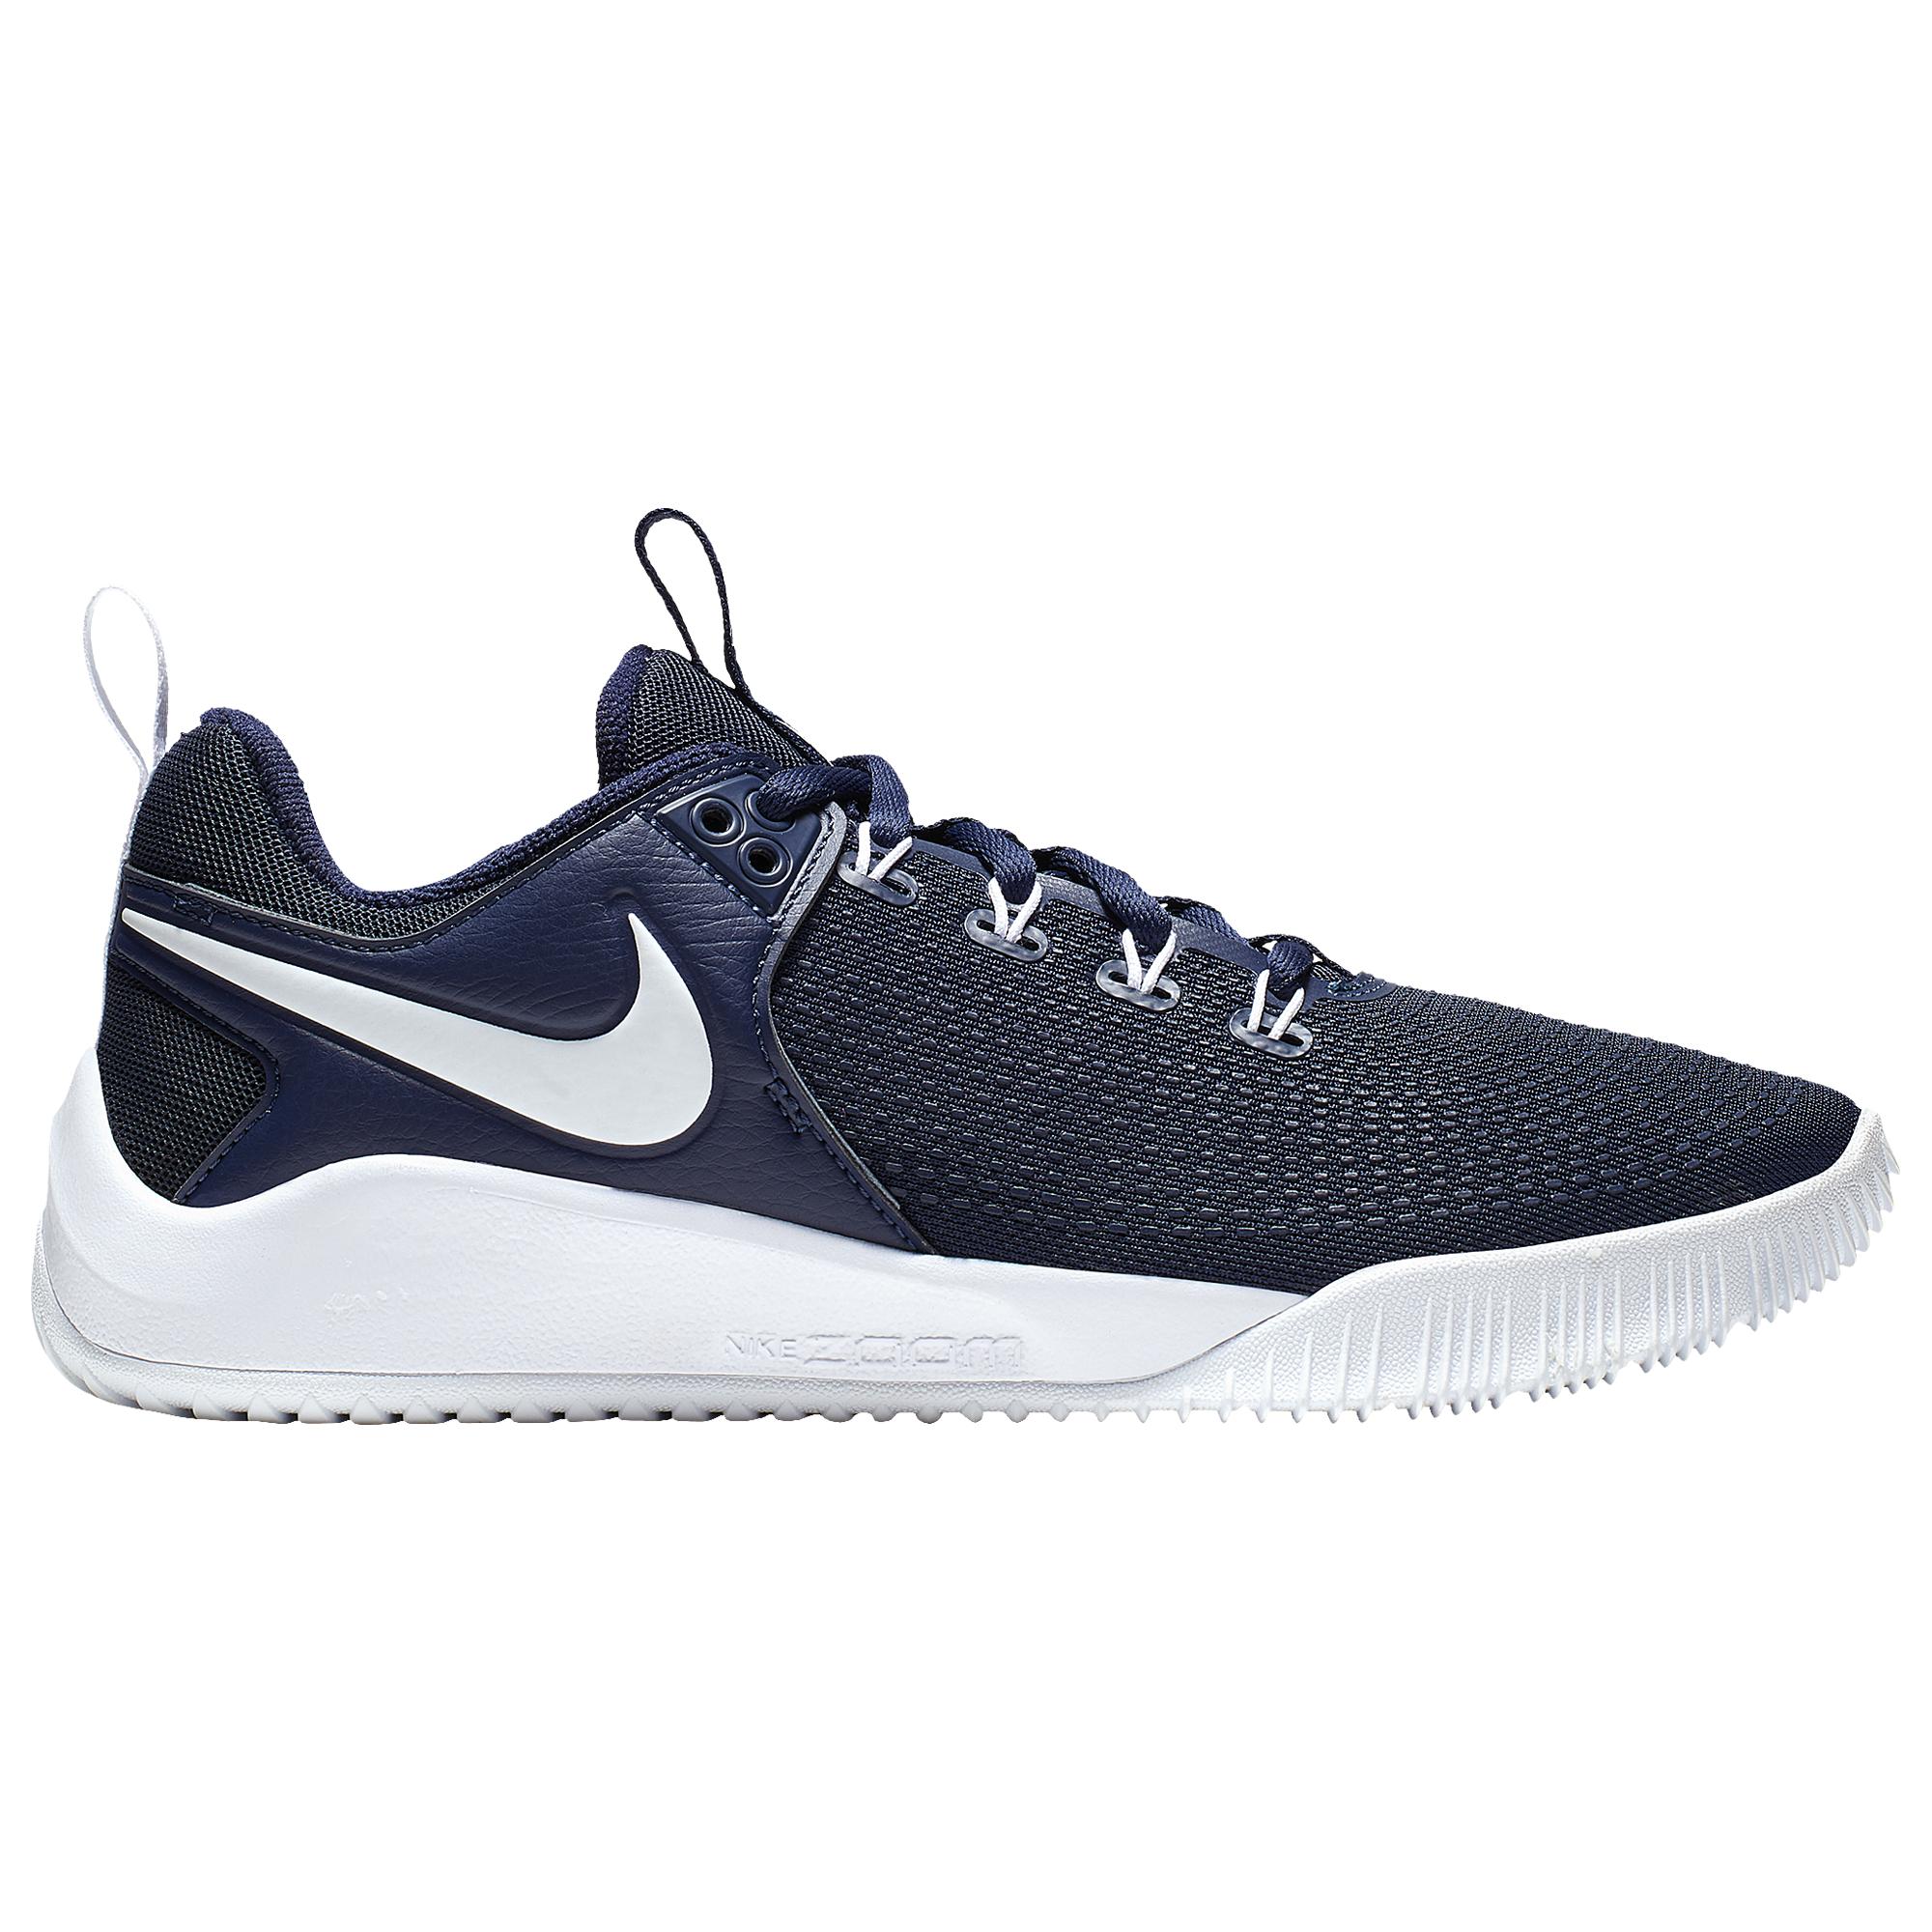 Nike Synthetic Zoom Hyperace 2 Volleyball Shoes in Midnight Navy/White ...